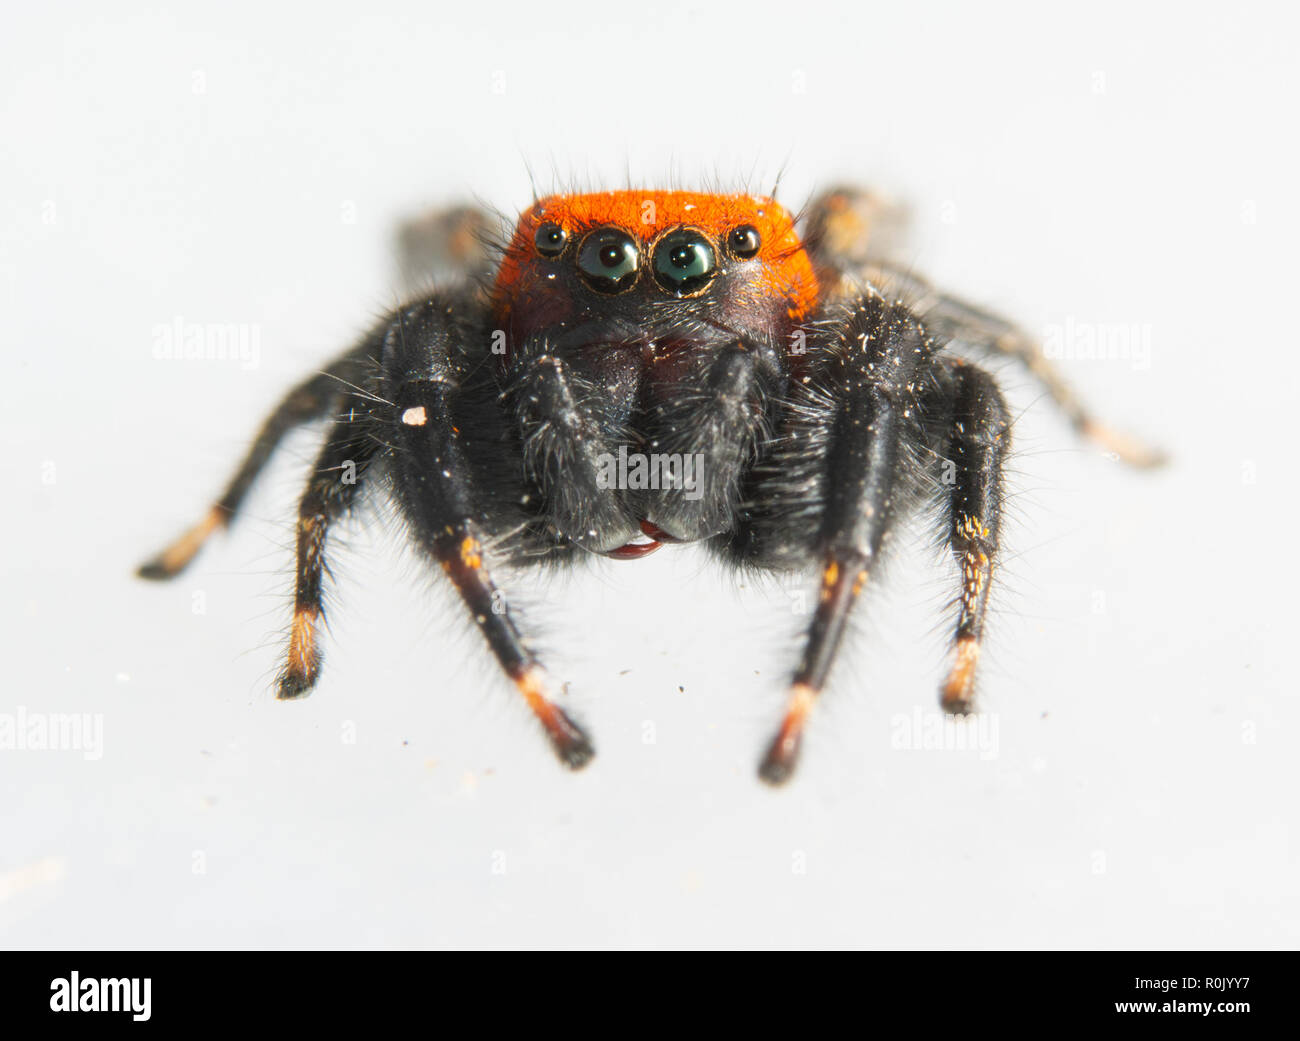 Beautiful black and orange Cardinal Jumping spider, Phidippus cardinalis, looking at the viewer, on white Stock Photo